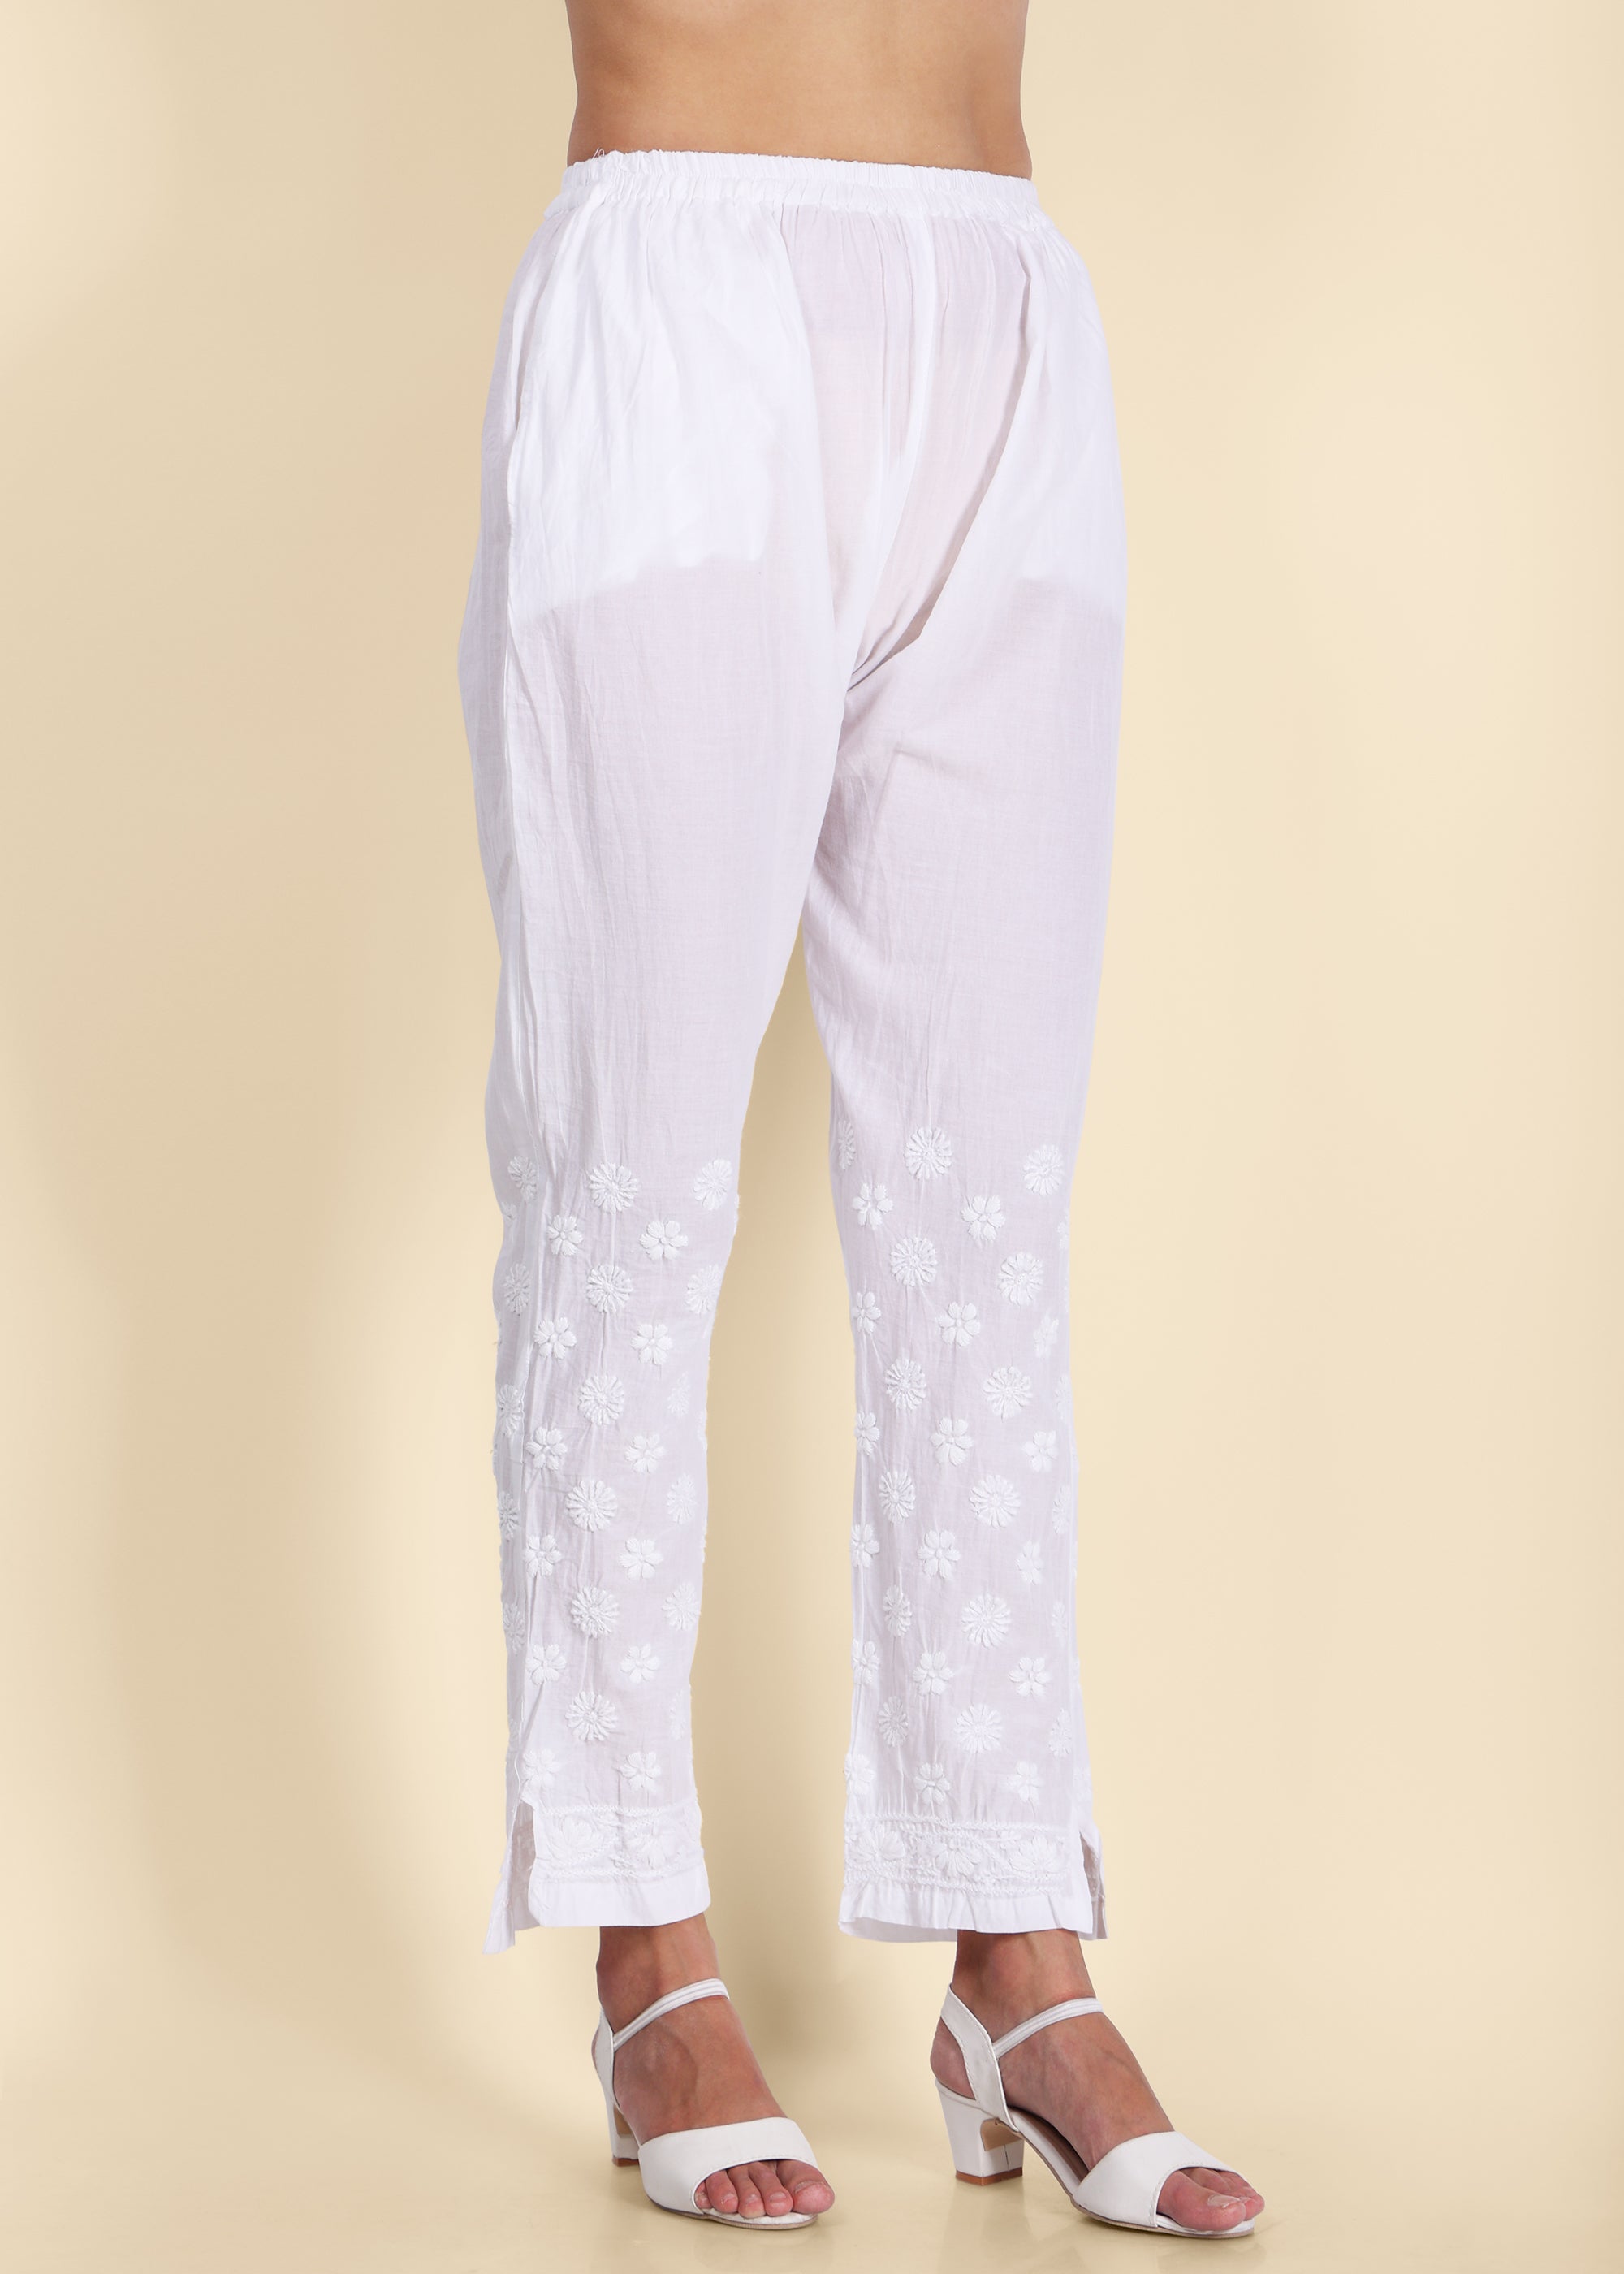 Ivory Vanilla Women Cotton Pants casual and semi formal daily trousers